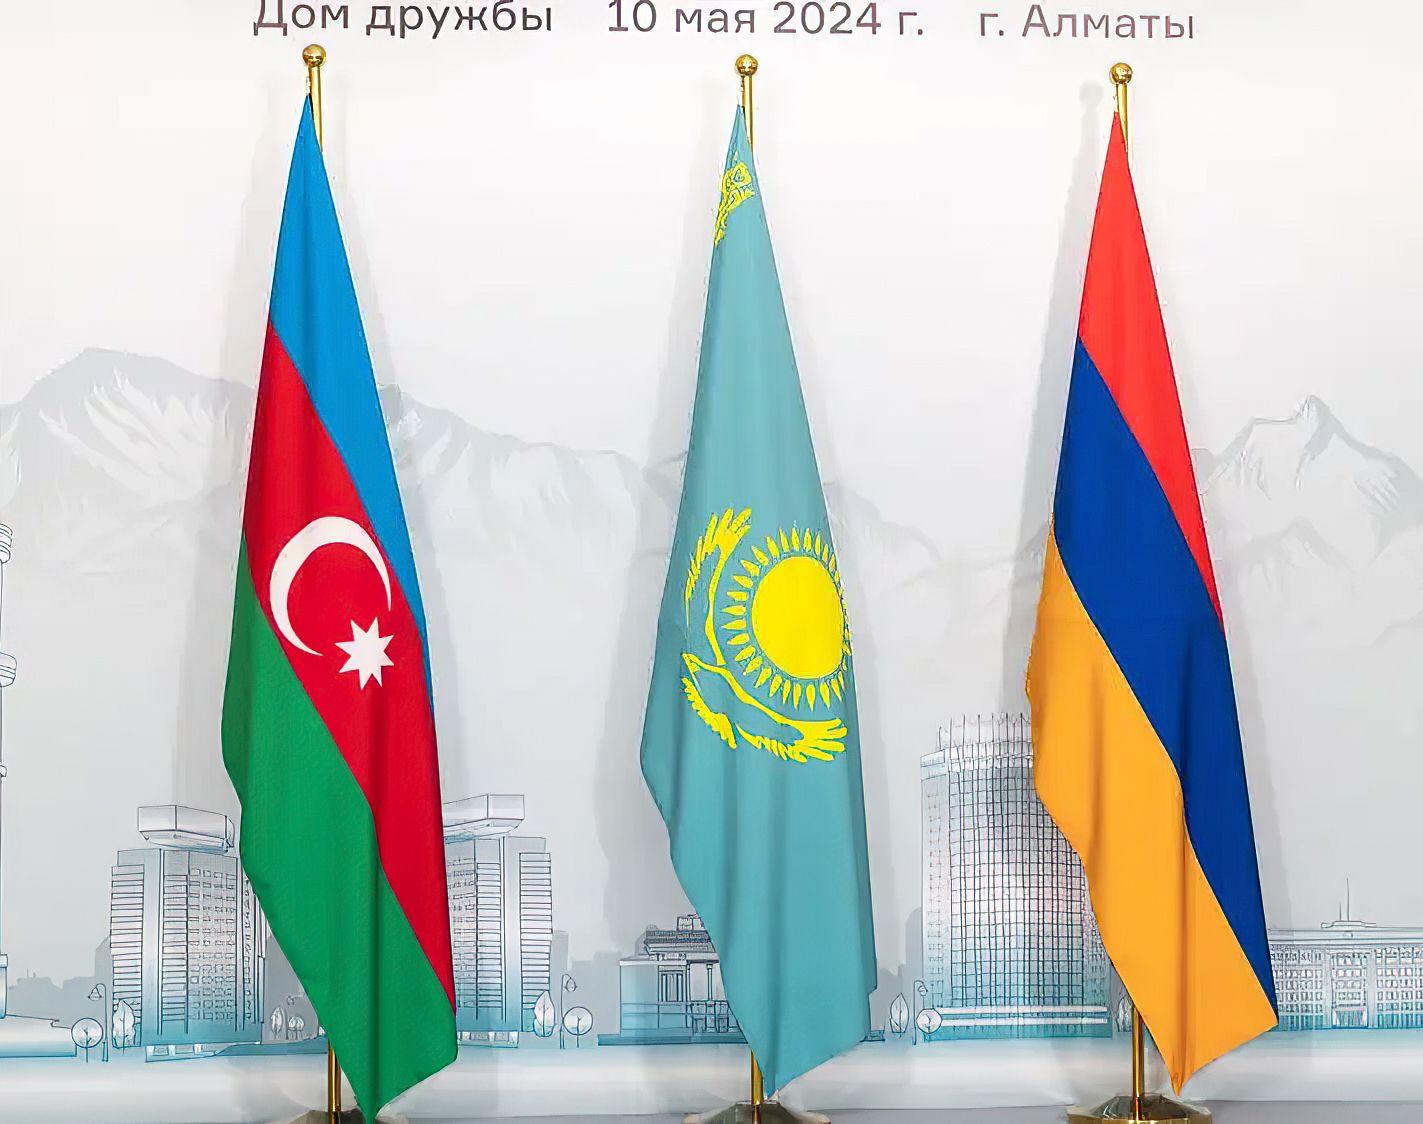 A bilateral meeting of the Foreign Ministers of Azerbaijan and Armenia is taking place in Almaty